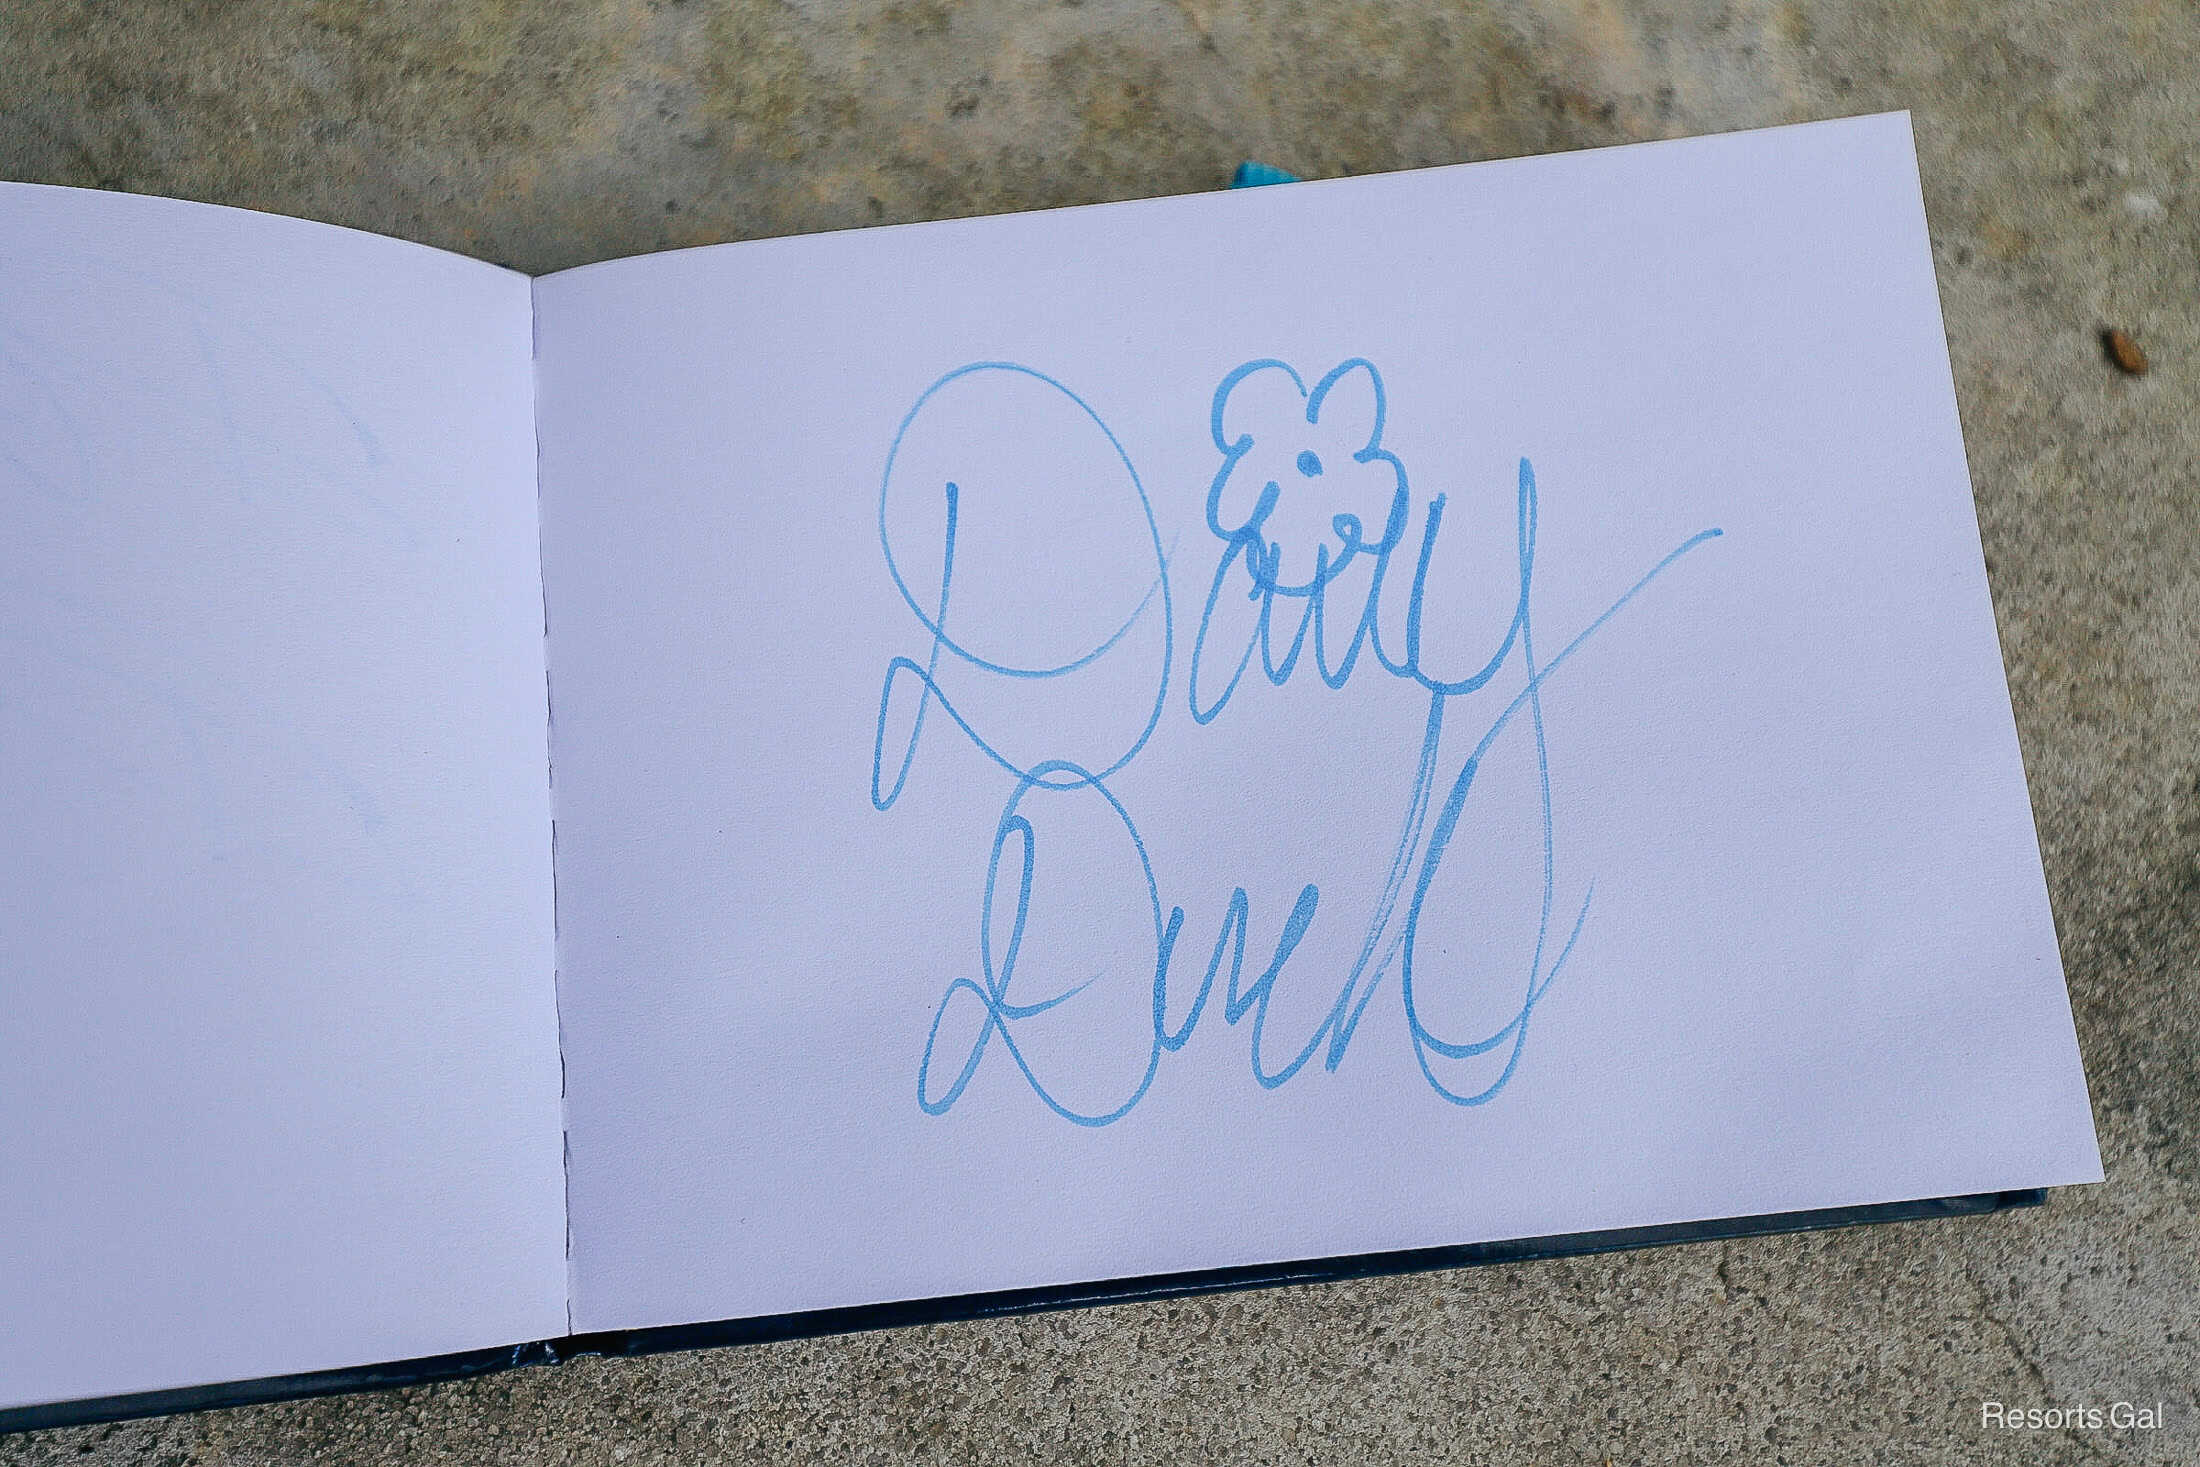 Daisy Duck's autograph with a flower to dot her "i'